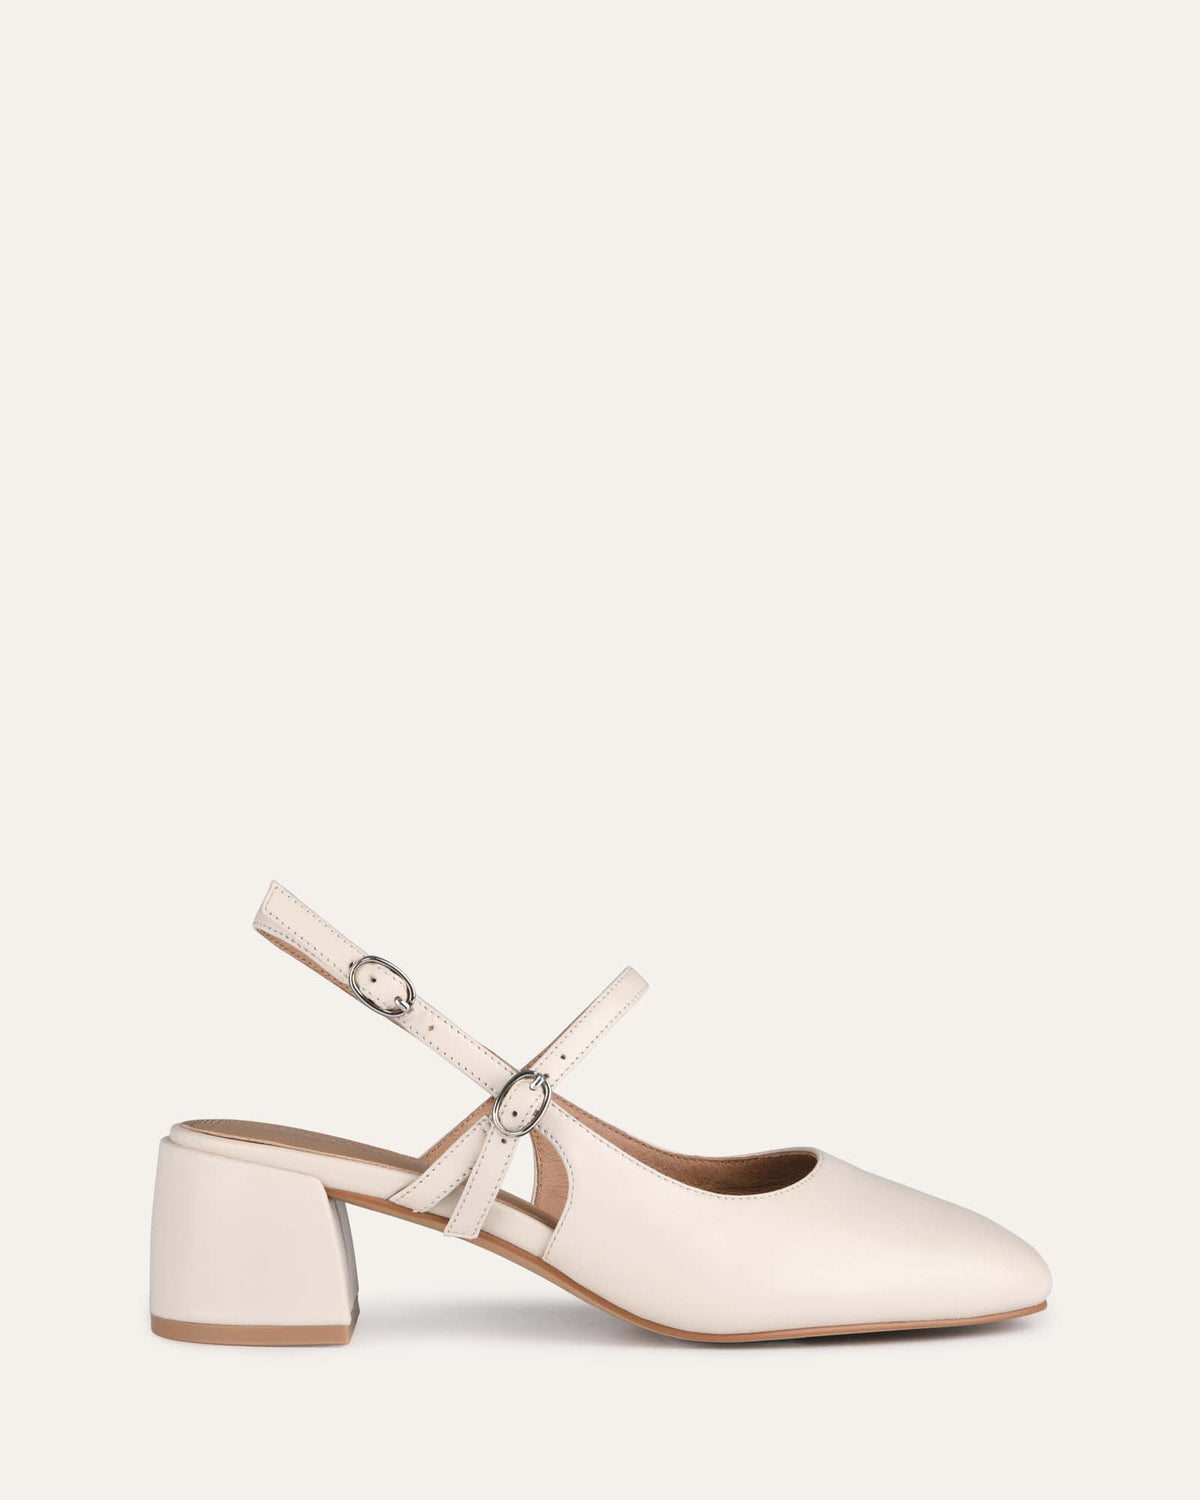 JENNA LOW HEELS OFF WHITE LEATHER